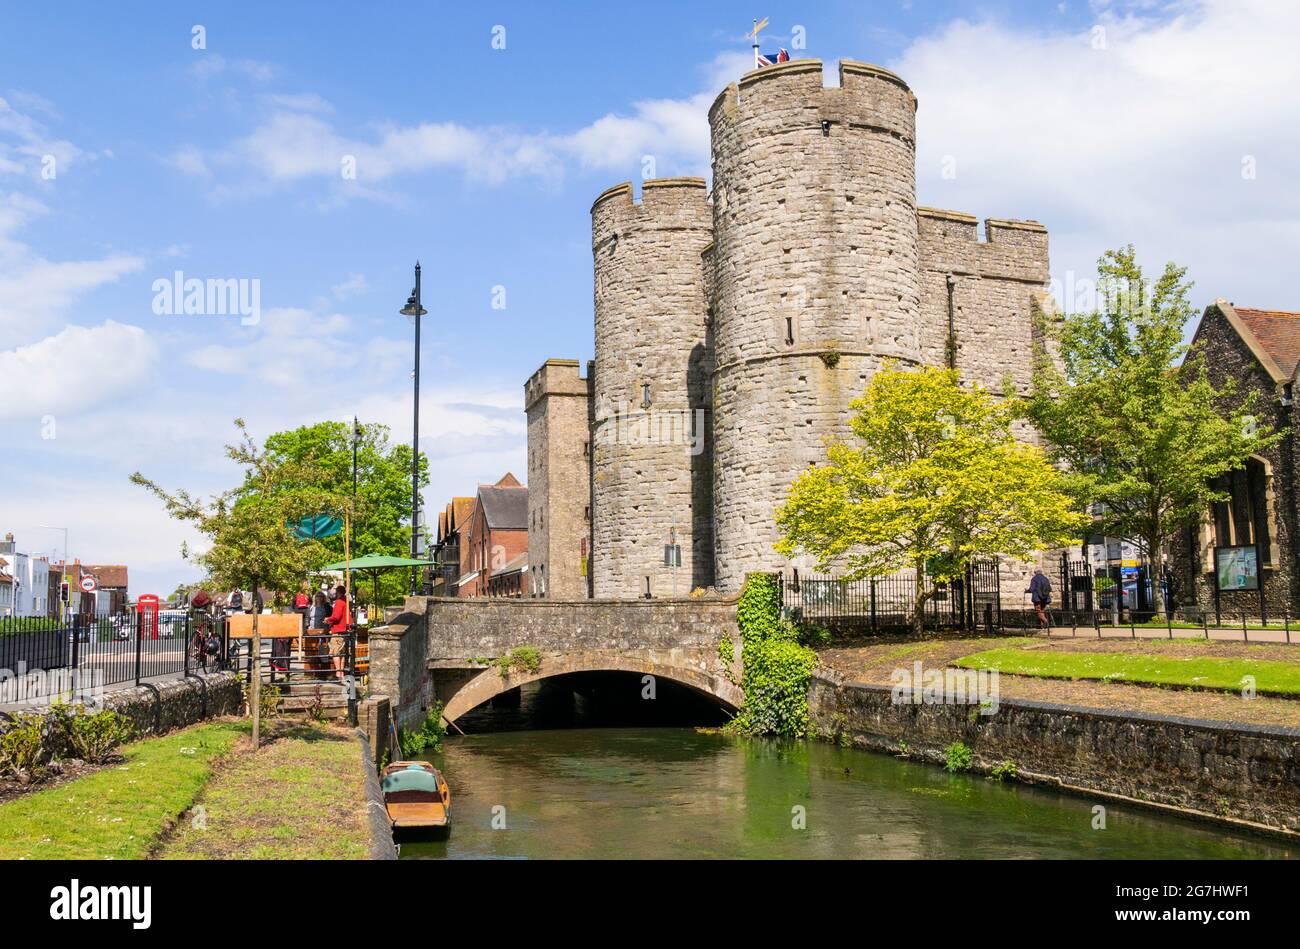 Westgate Towers medieval gateway Westgate Gardens and Great Stour River Canterbury Kent England UK GB Europe Stock Photo